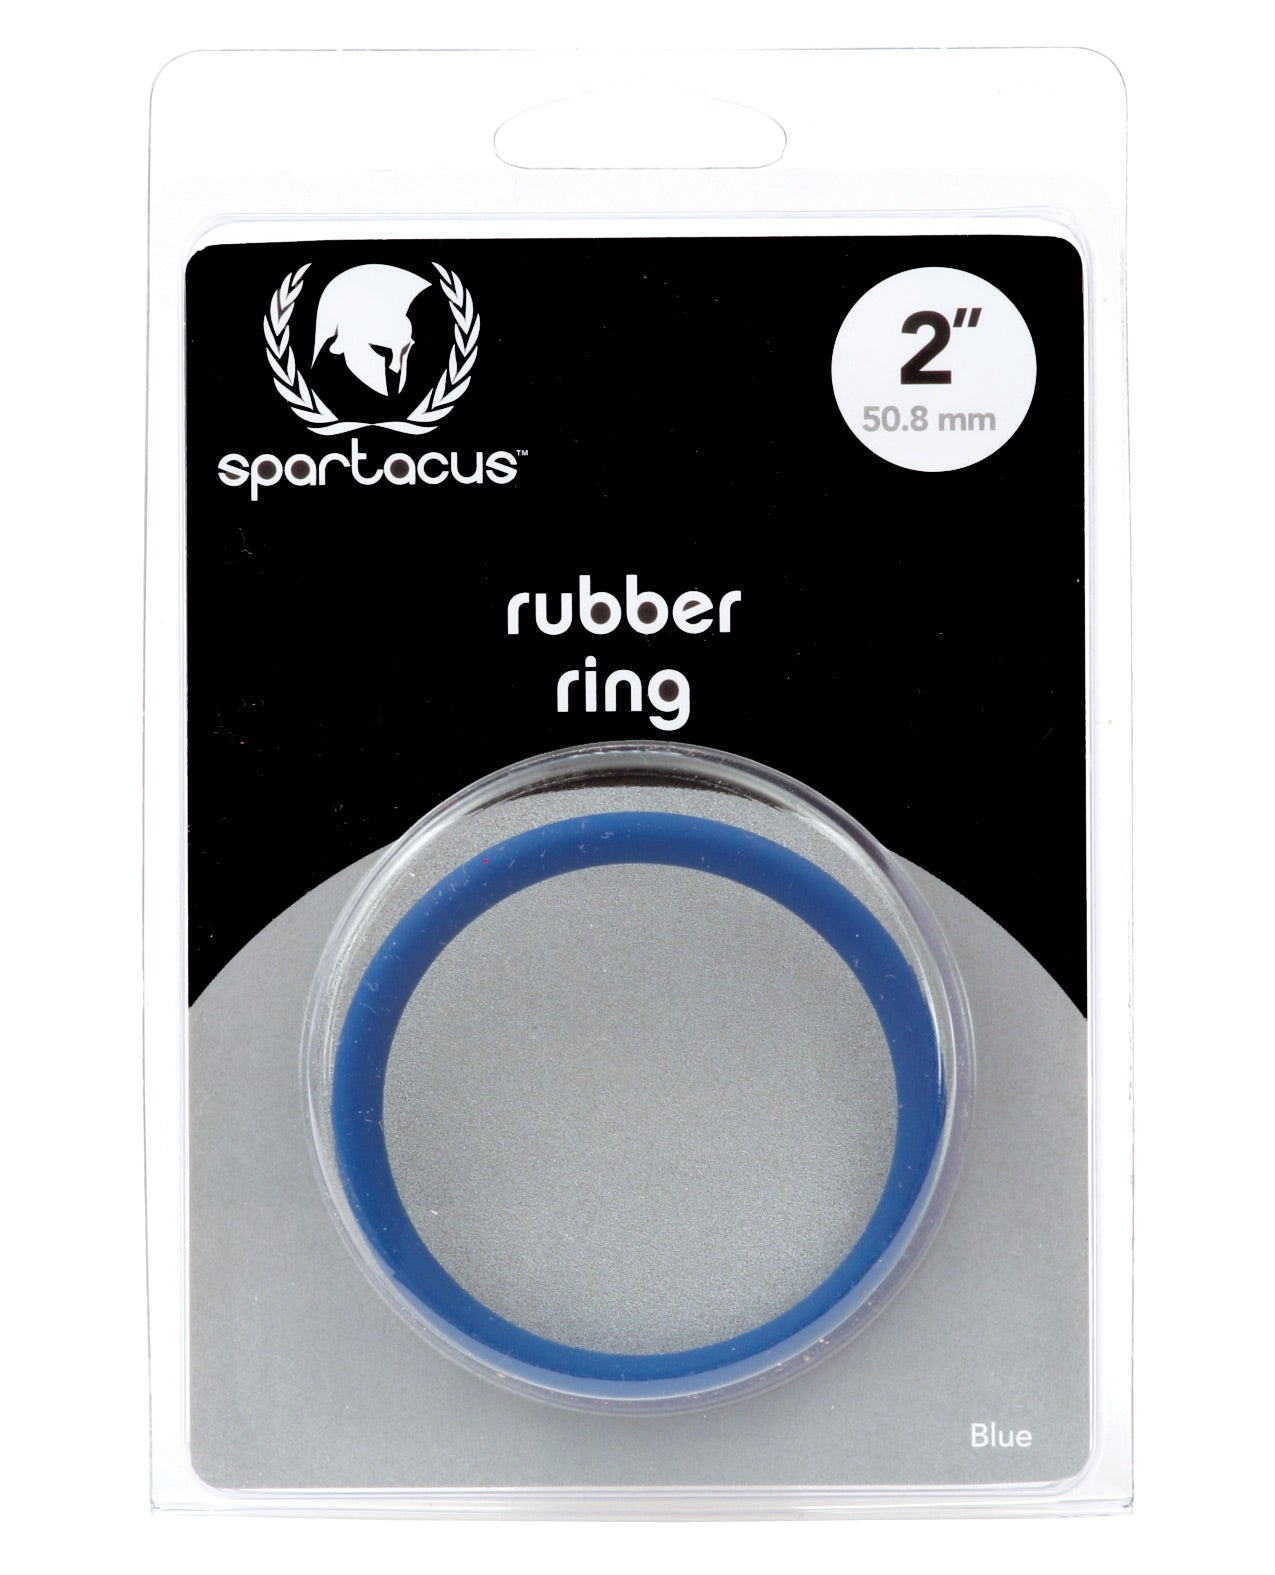 Spartacus 2" Rubber Cock Ring - Blue